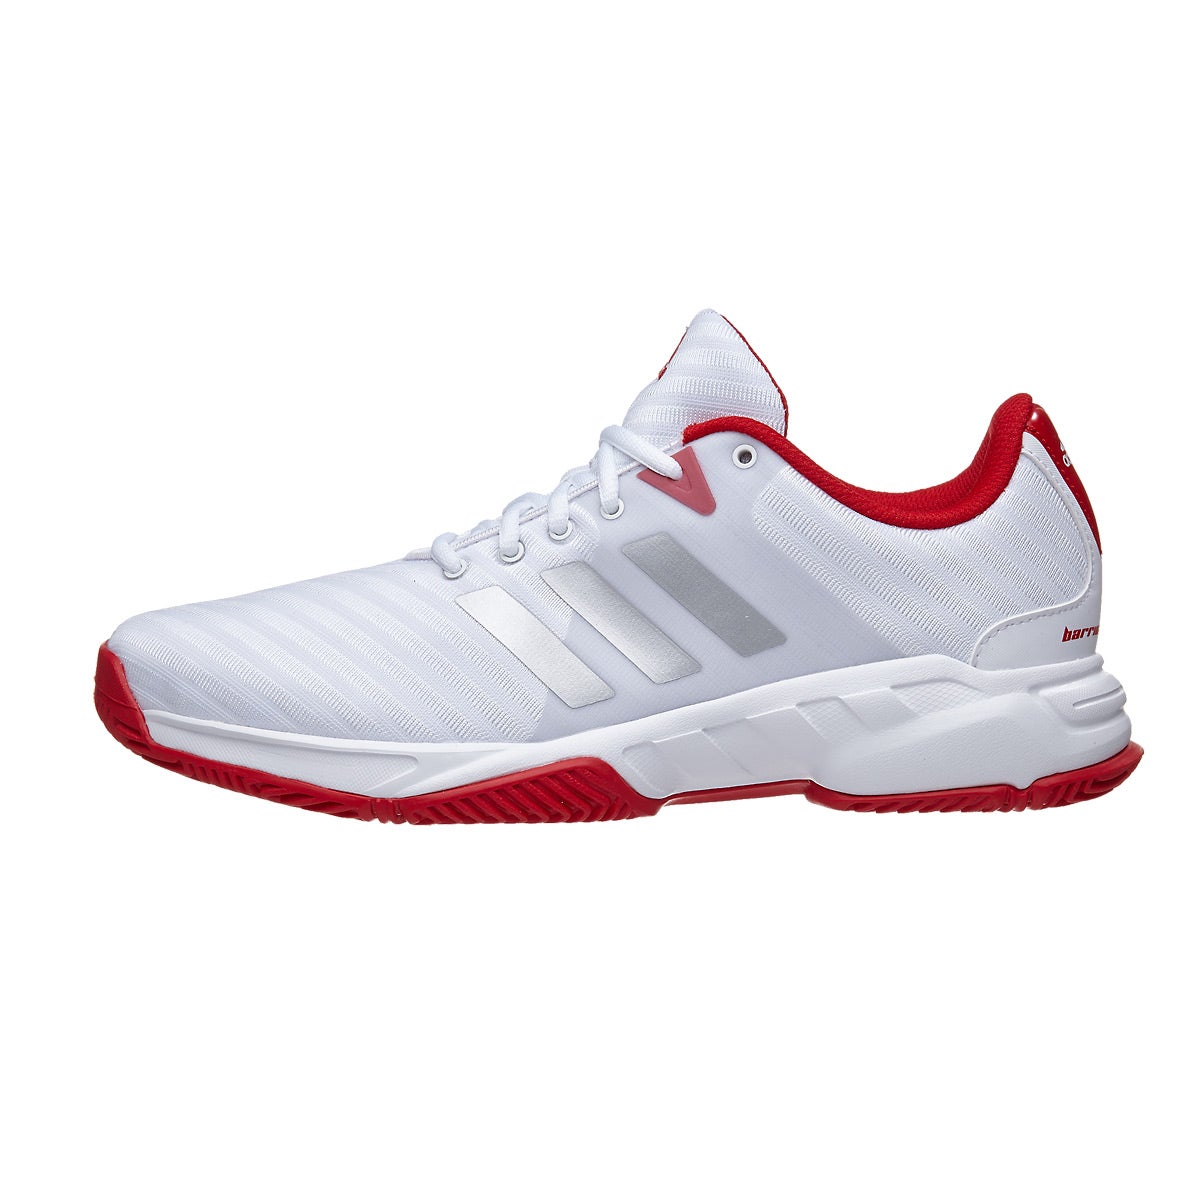 adidas Barricade Court 3 White/Sil/Scarlet Men's Shoes 360 ...